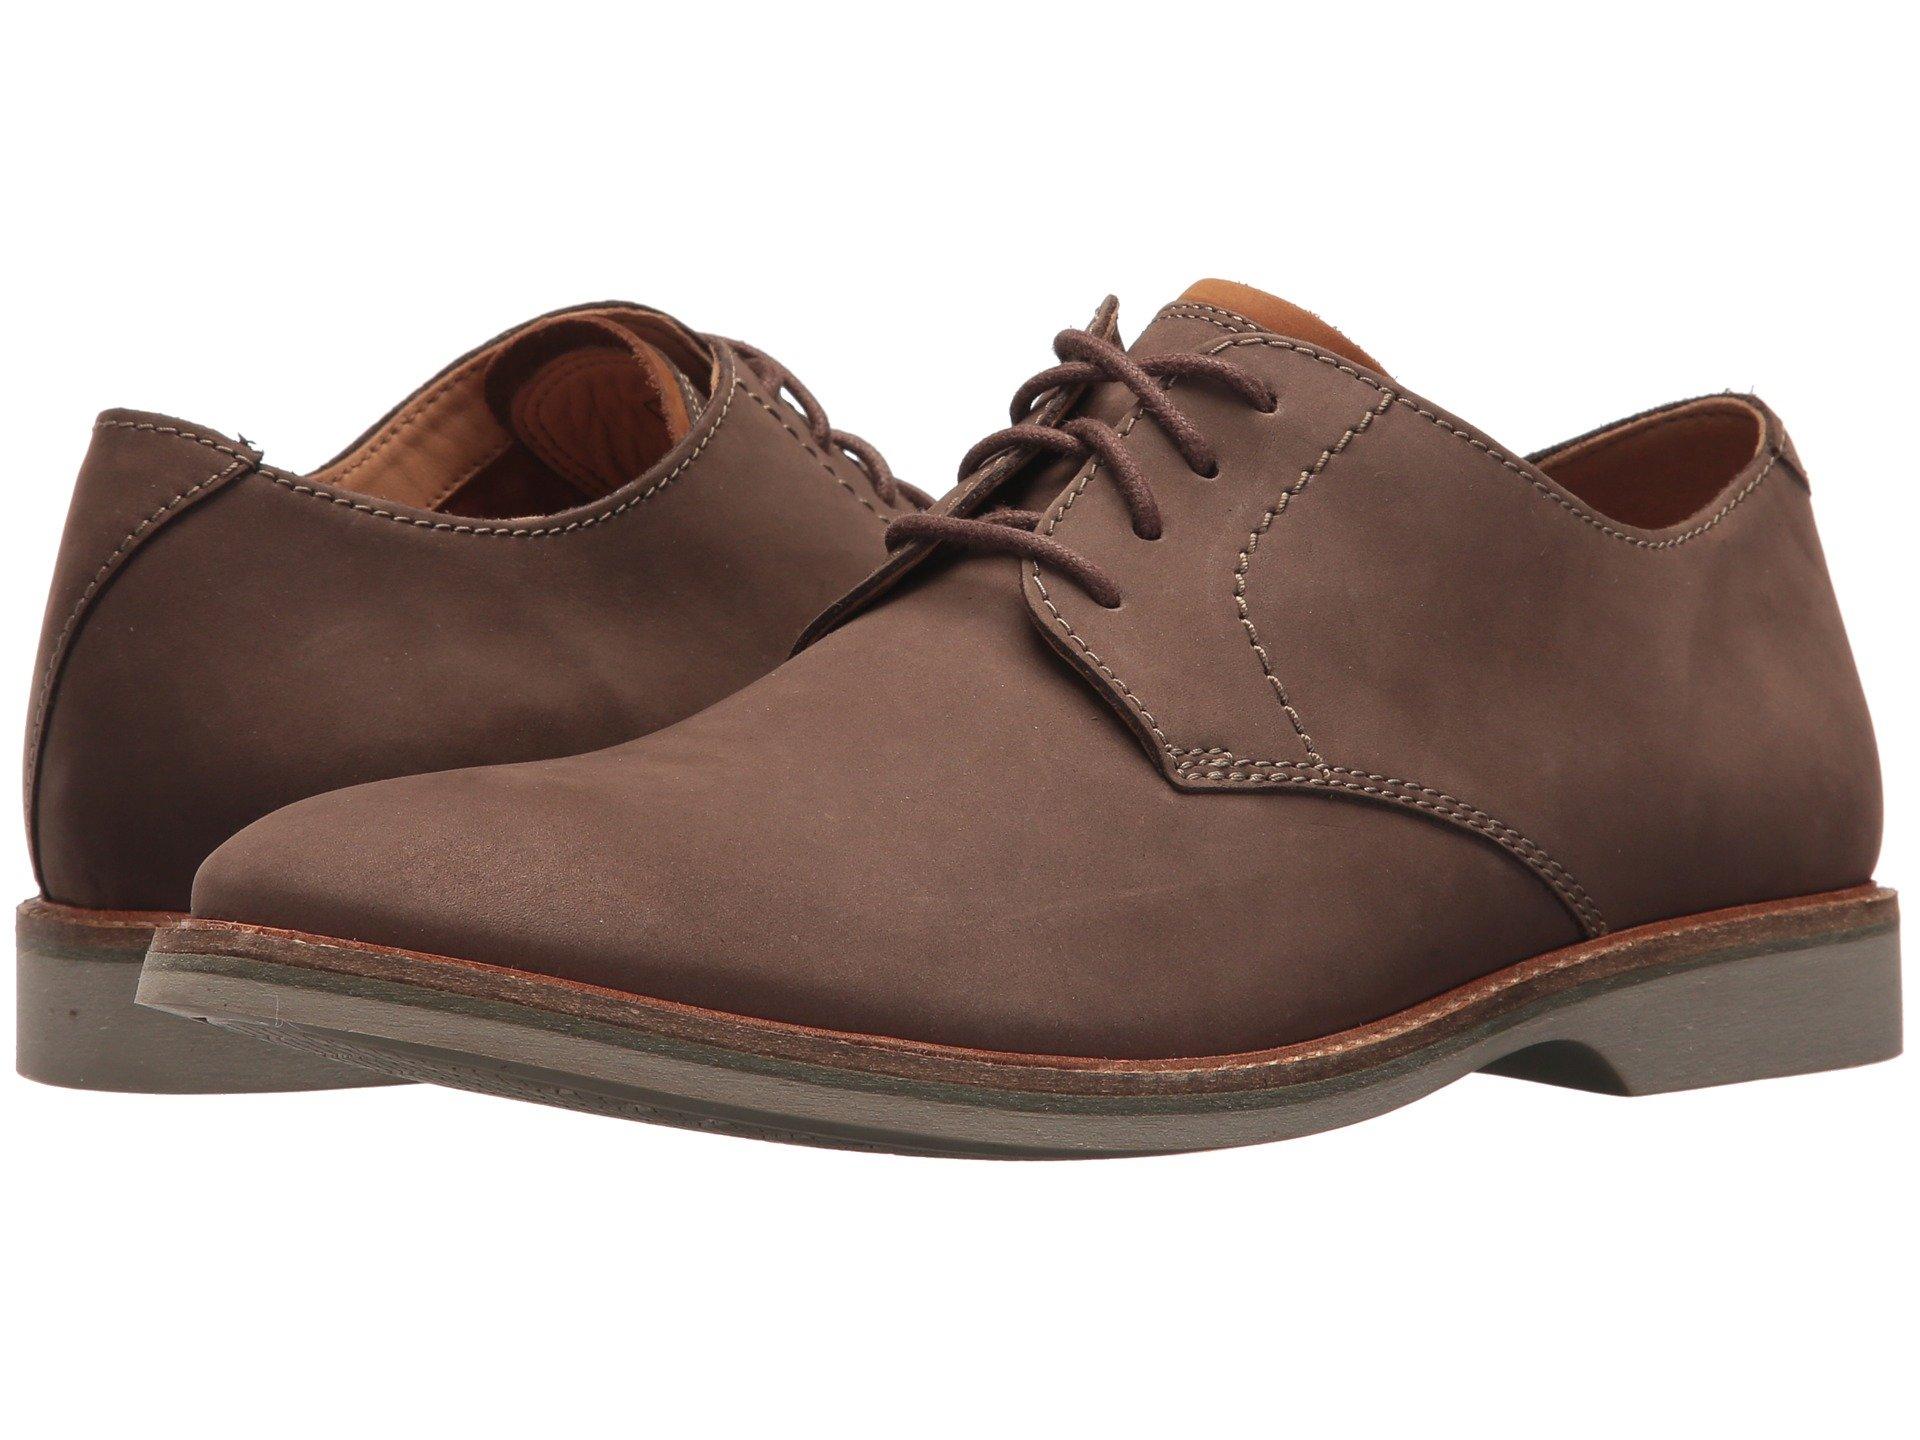 Clarks Atticus Lace (taupe Nubuck) Shoes in Brown for Men - Lyst